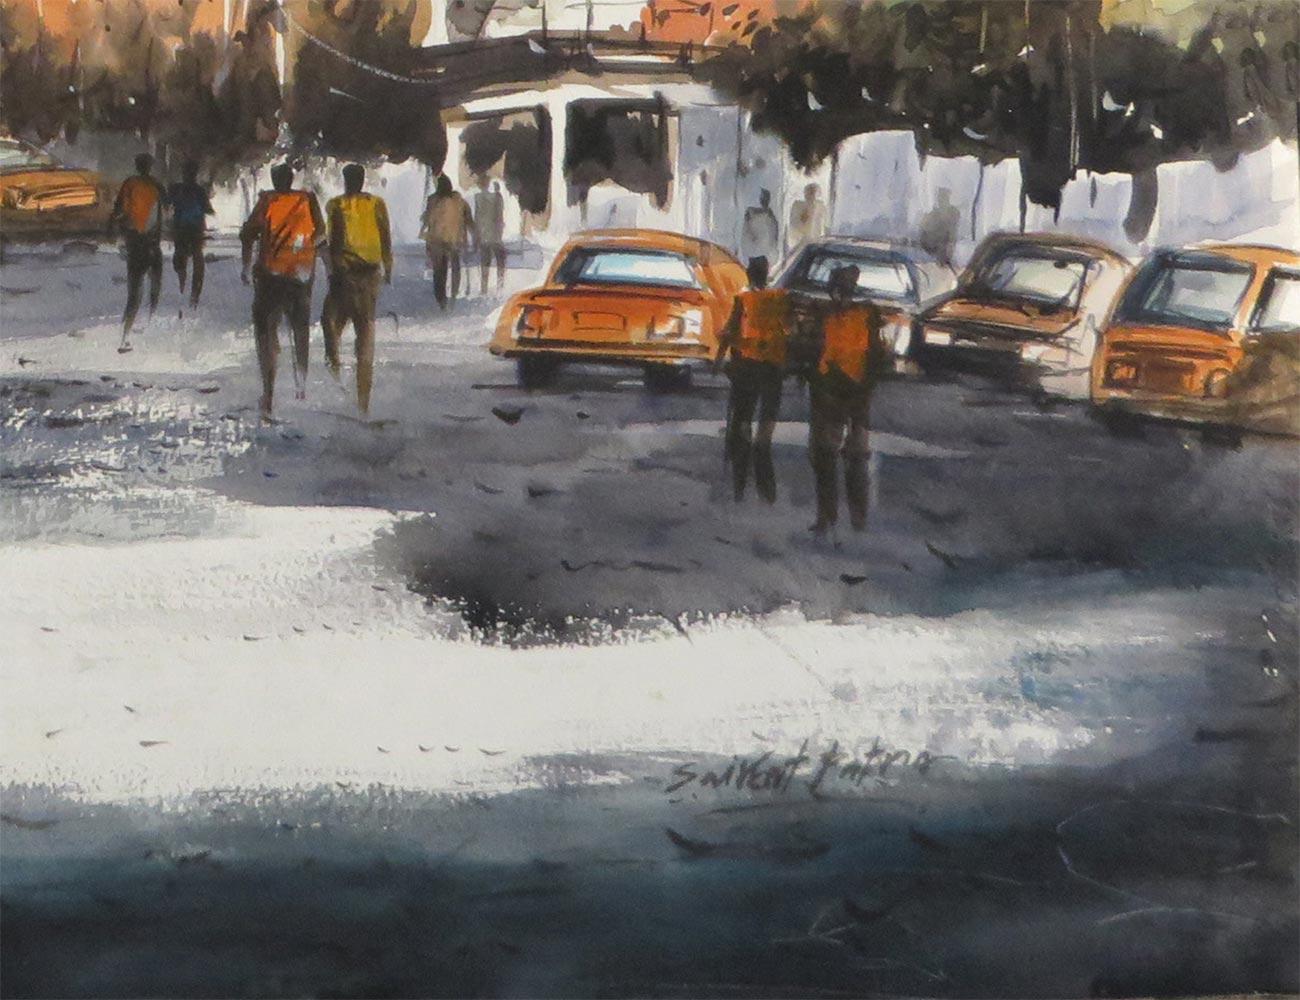 City Scape, City Life, Car, Watercolor on Paper by Indian Artist 